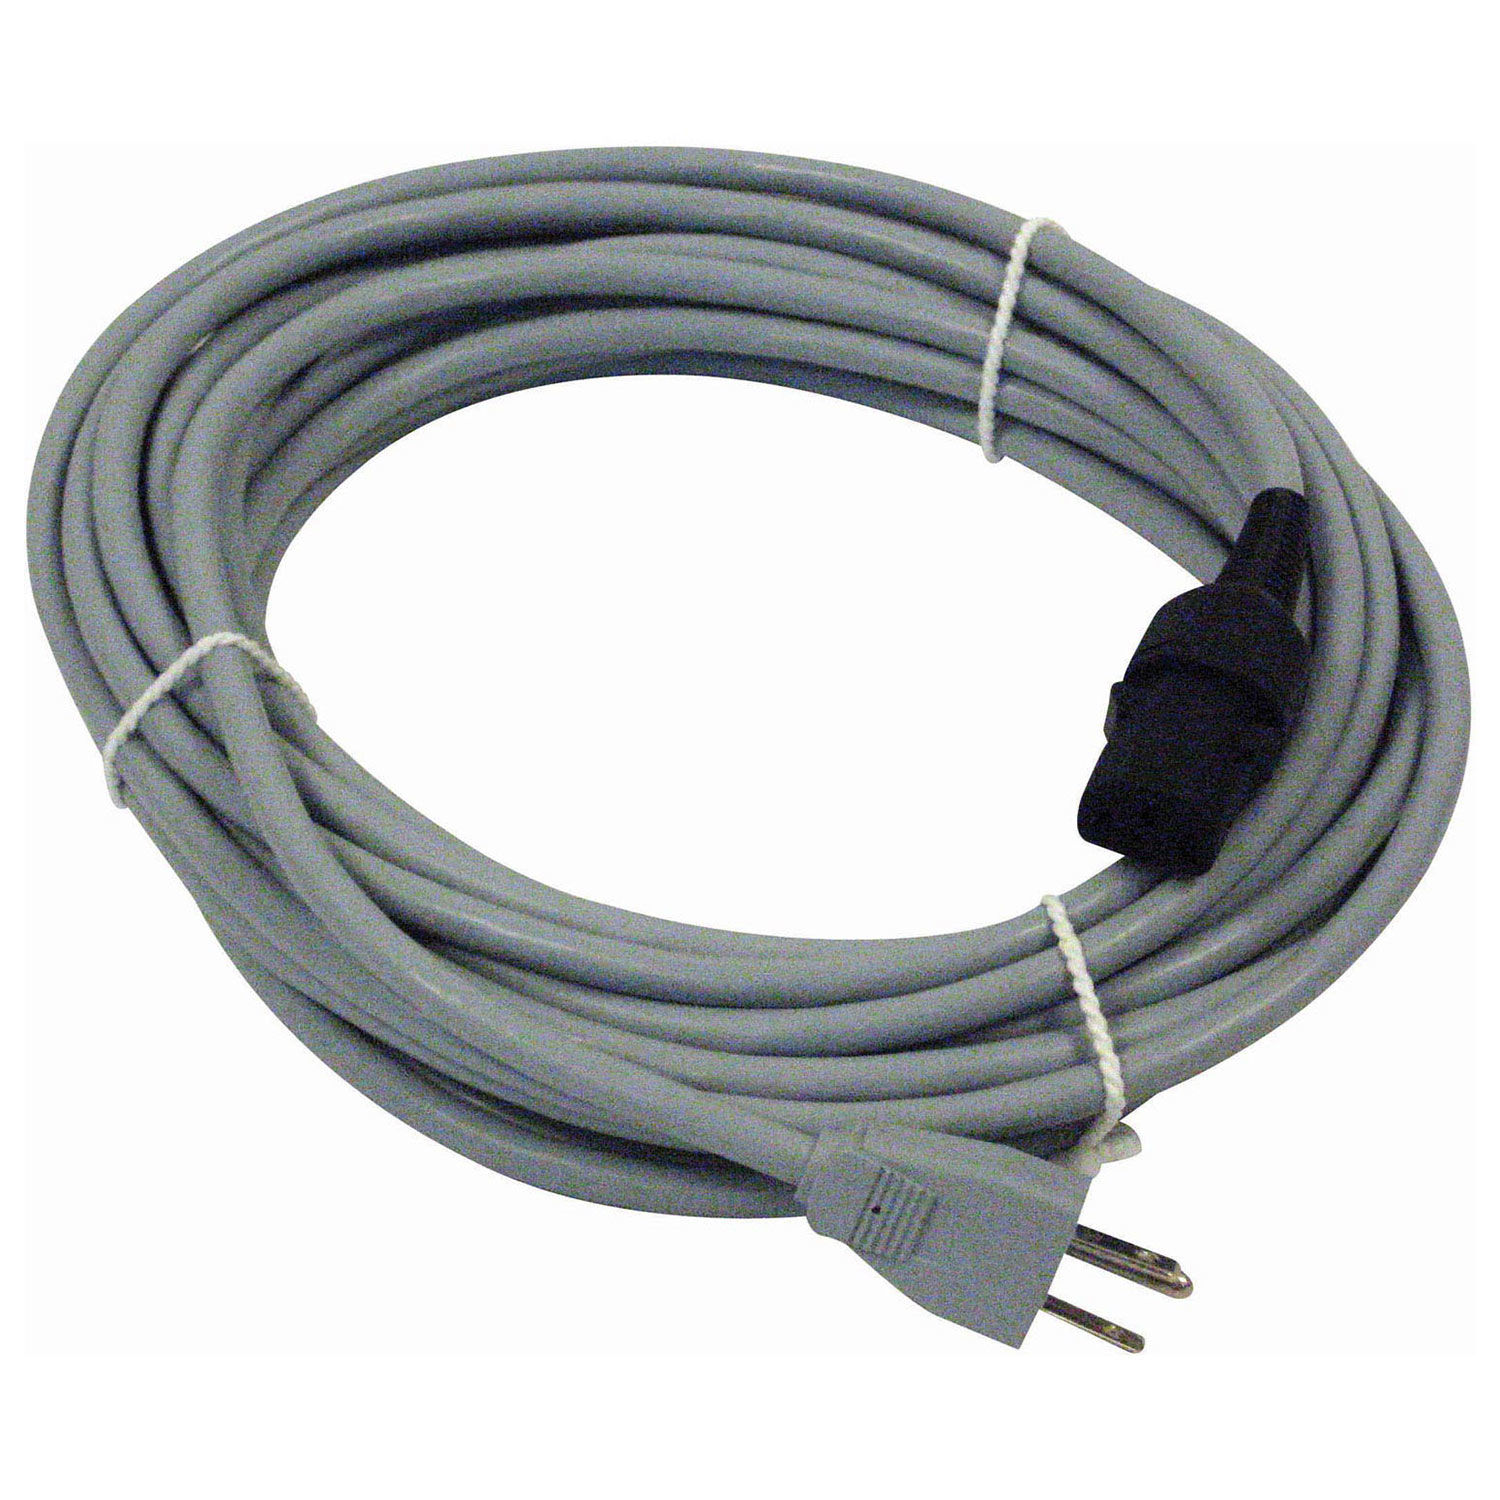 Nilfisk Replacement 30' Power Cord for GM80 | eBay